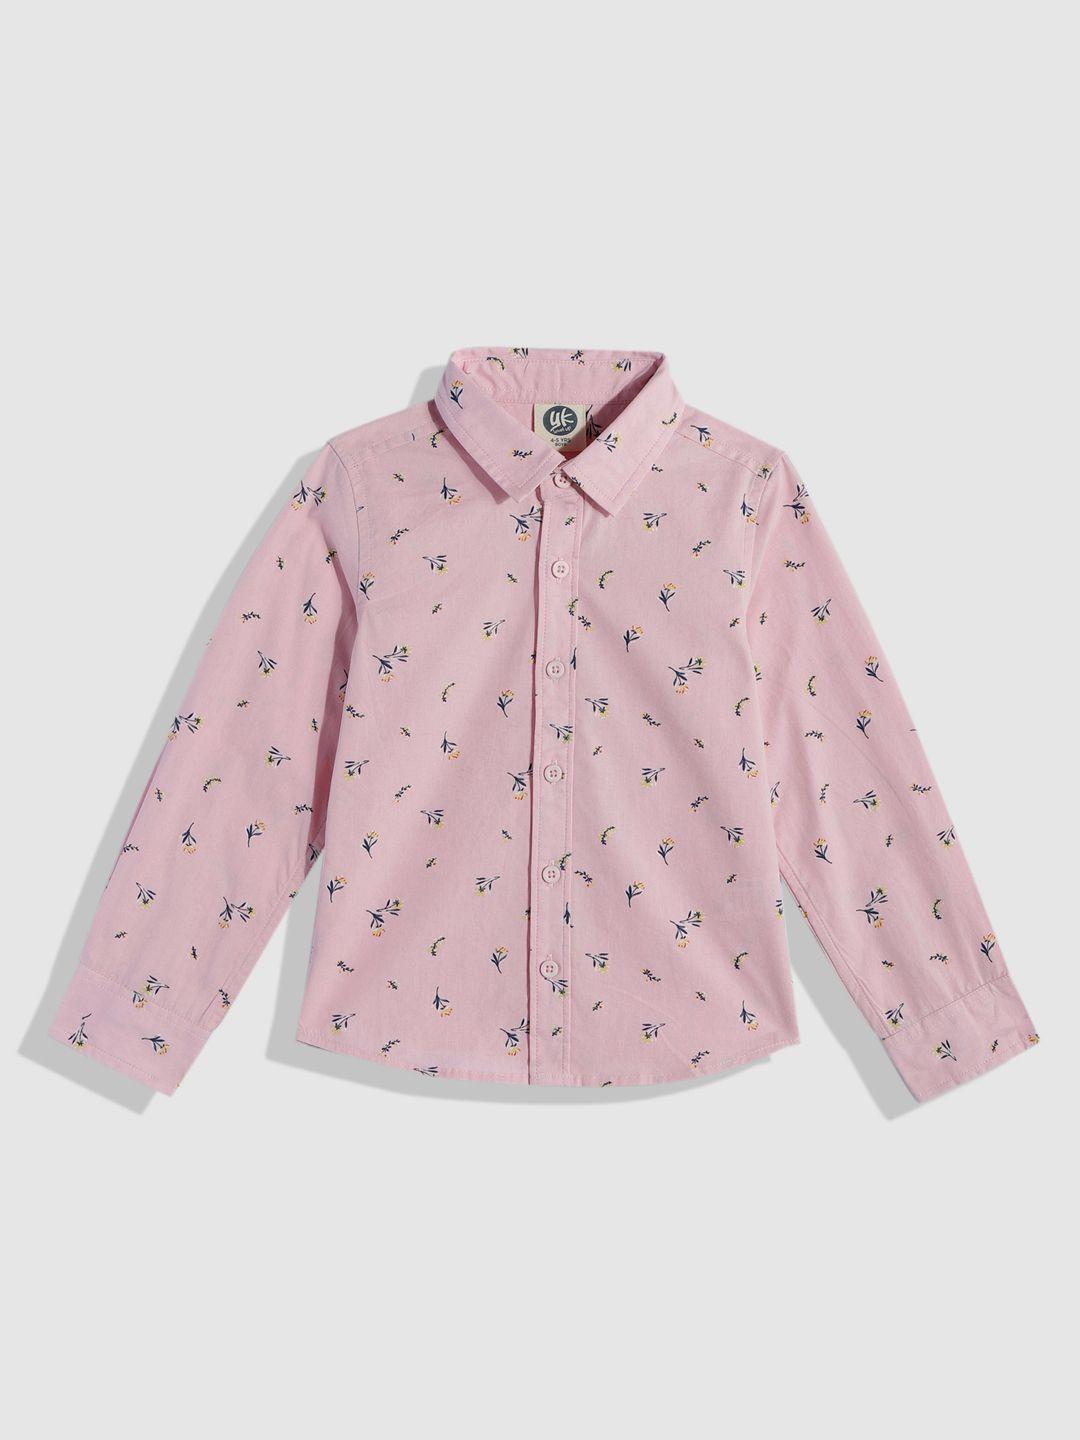 yk boys floral opaque printed casual shirt